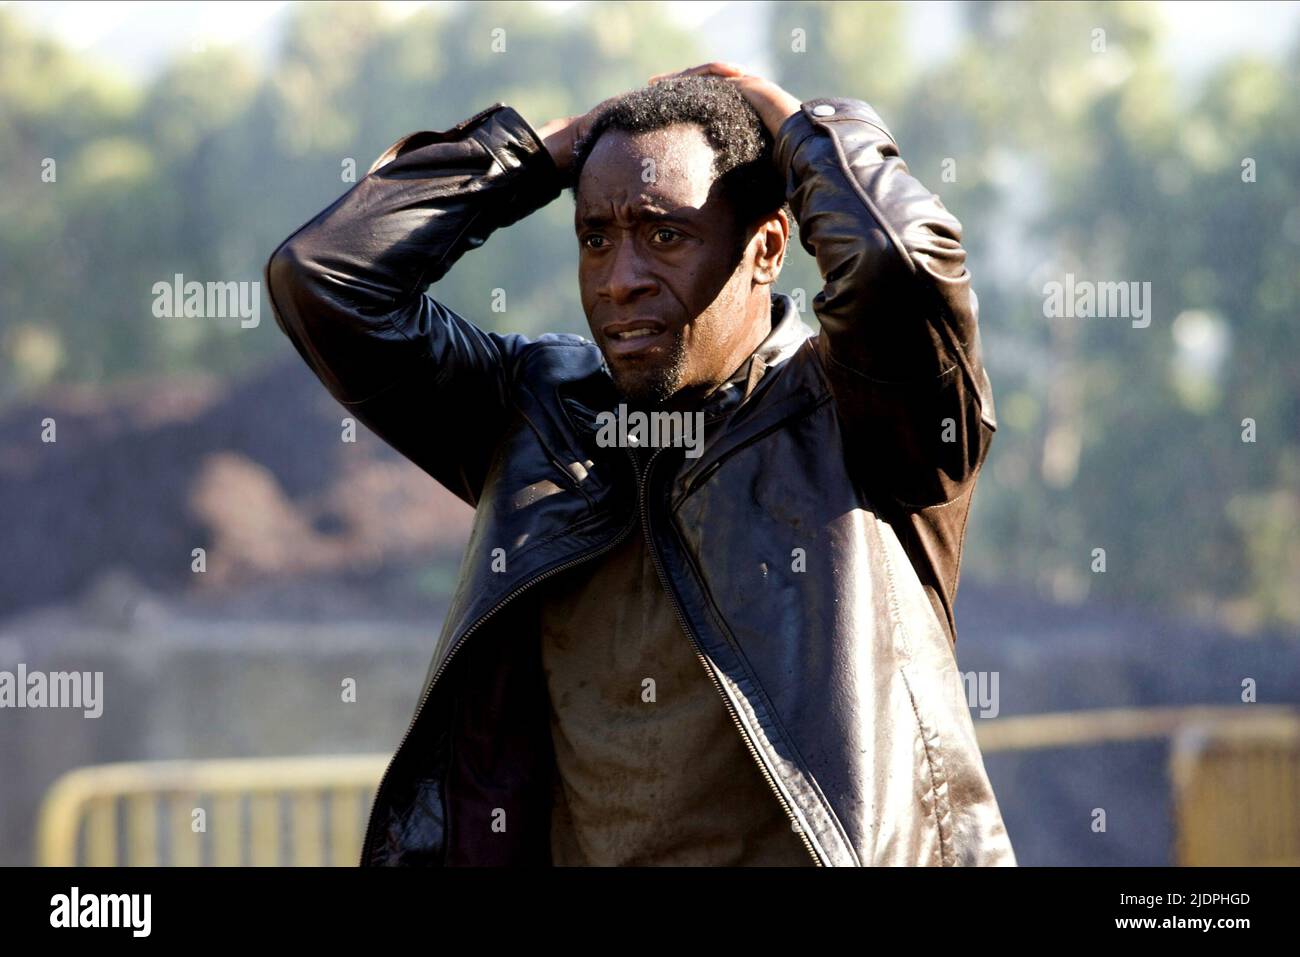 DON CHEADLE, TRAITOR, 2008, Banque D'Images